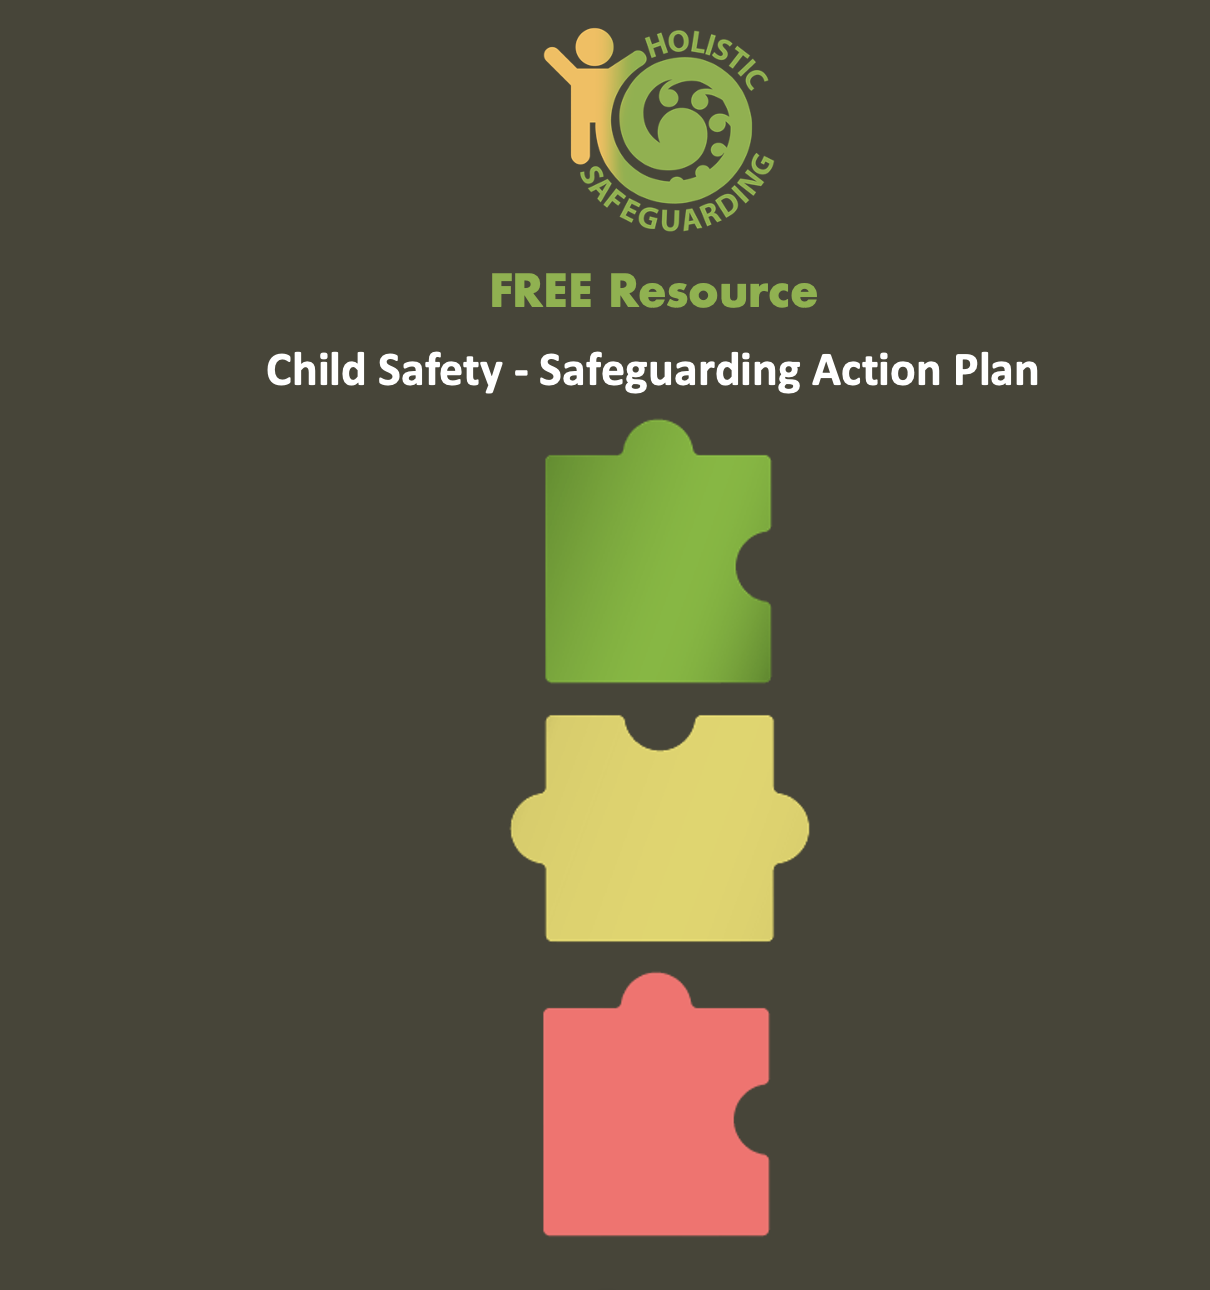 Child Safety Safeguarding Action Plan - FREE